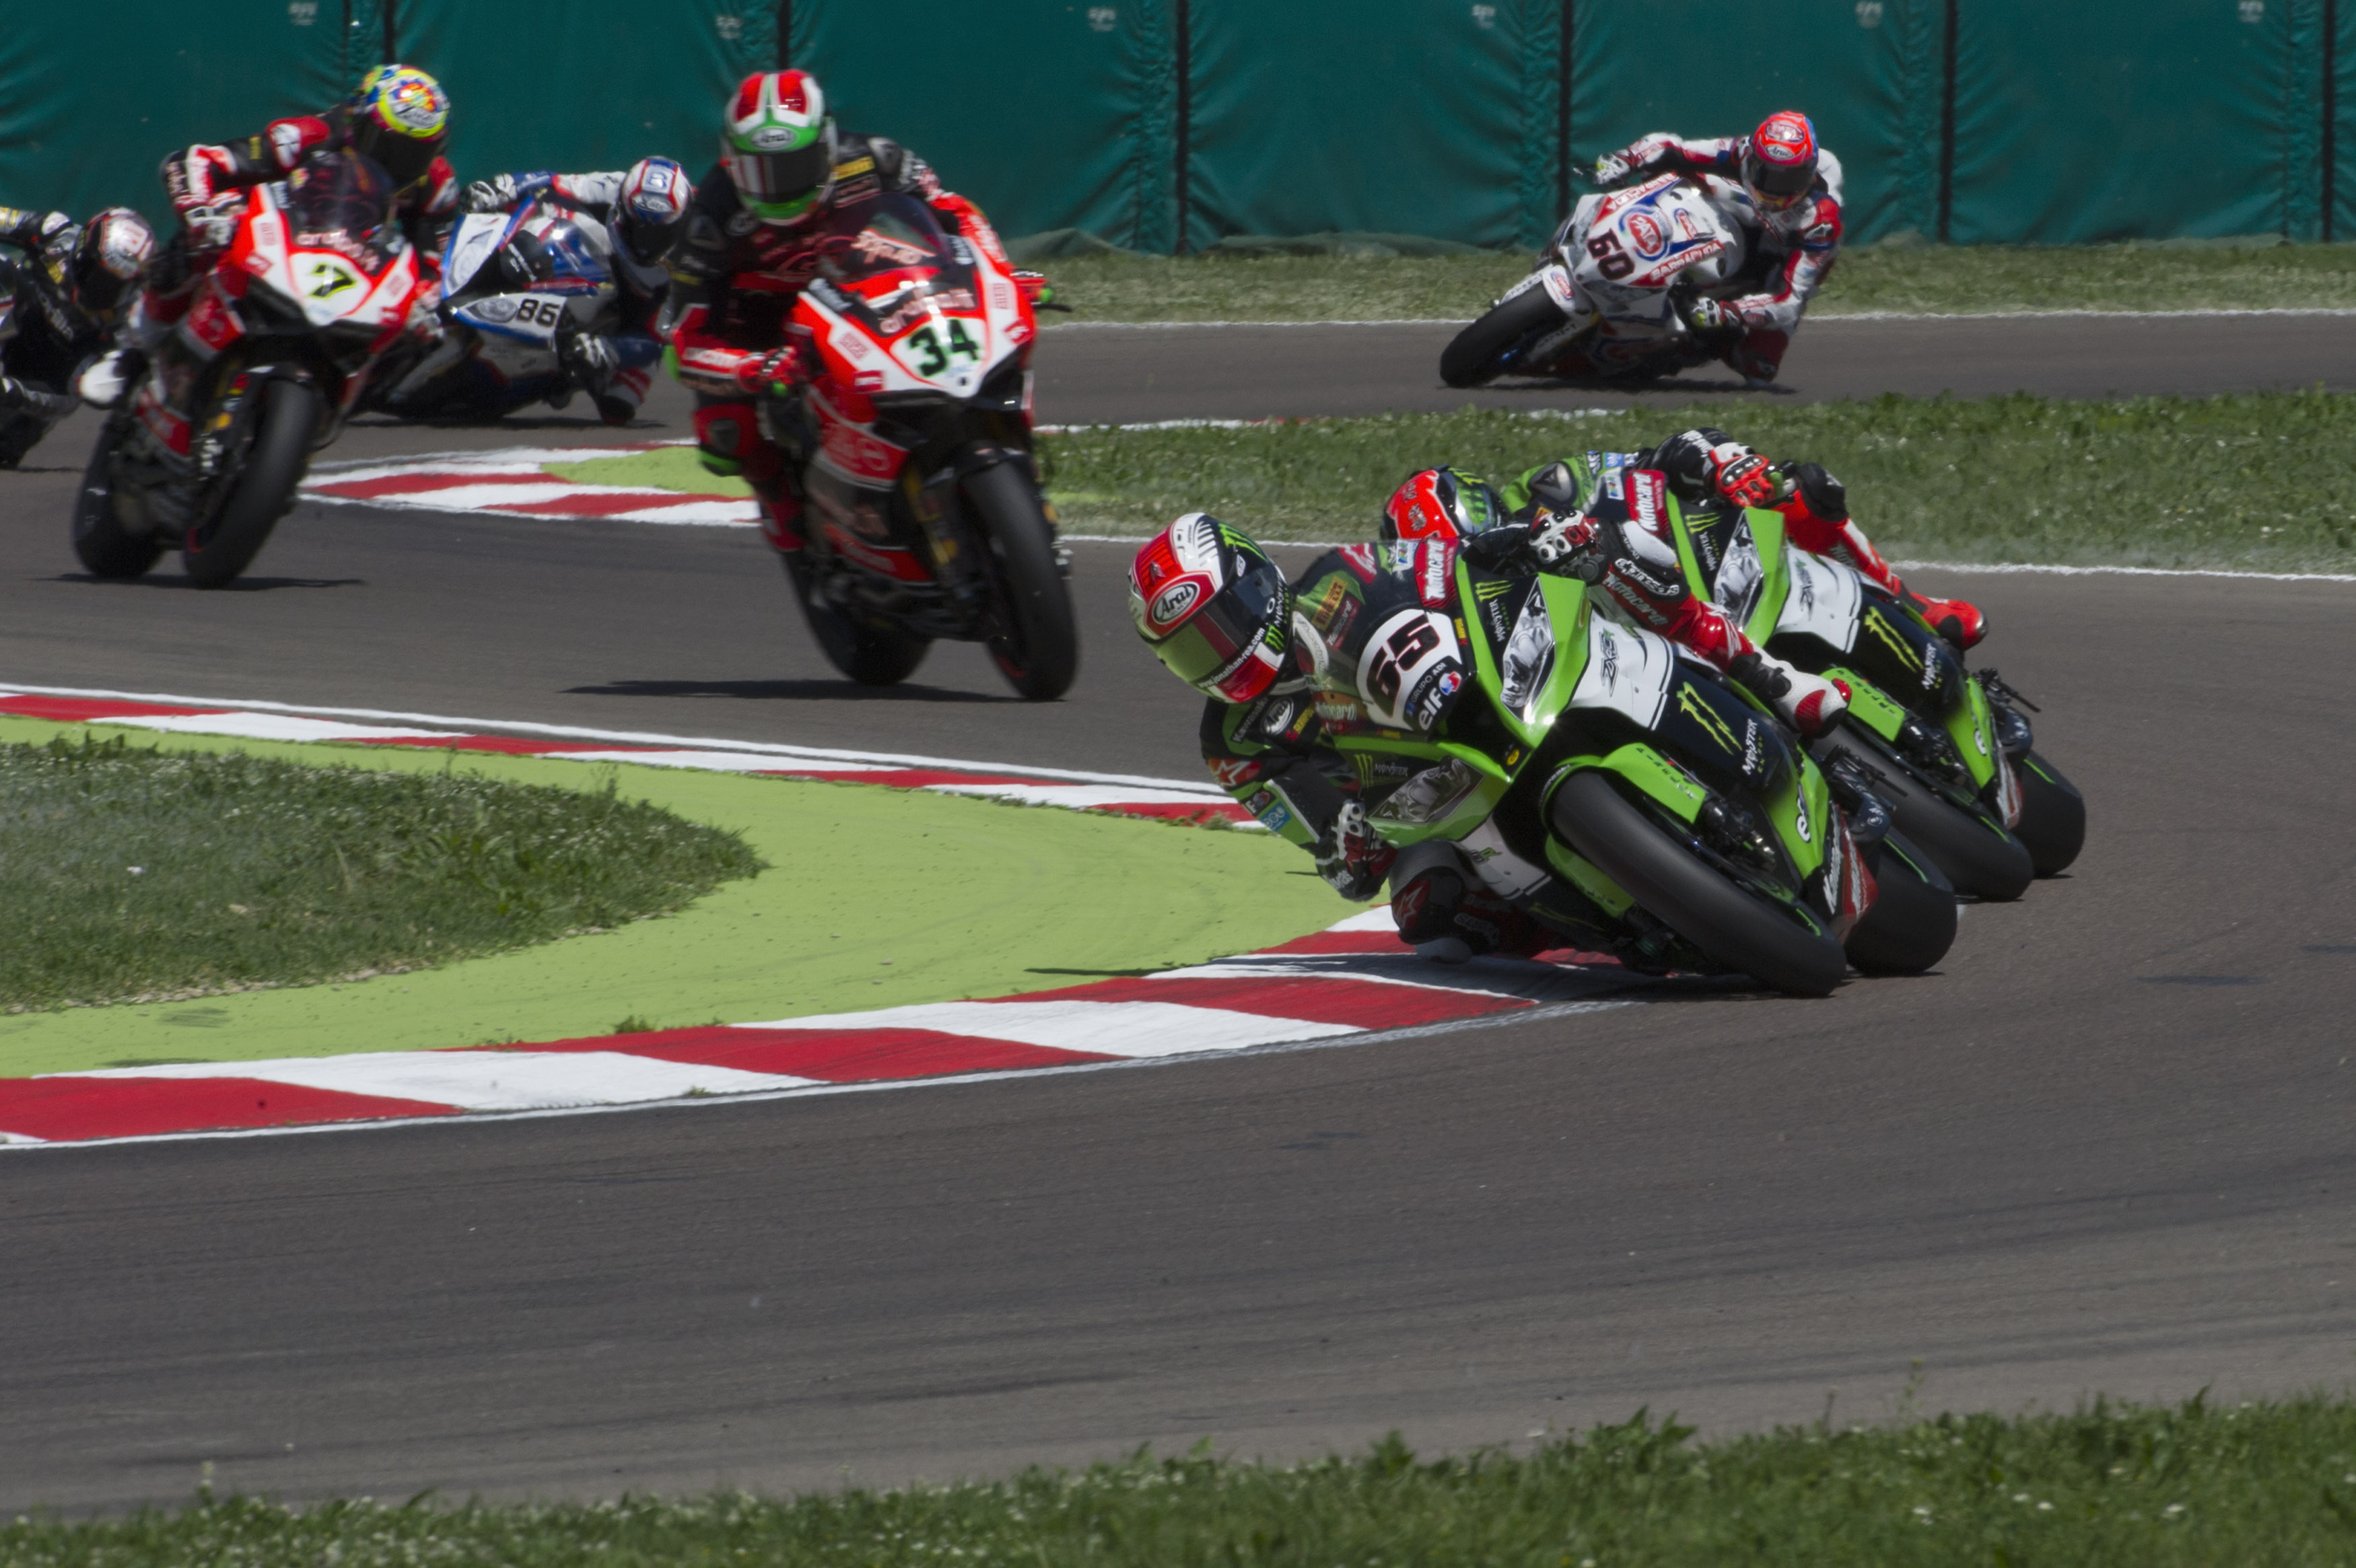 WSB 2015: Imola race two results